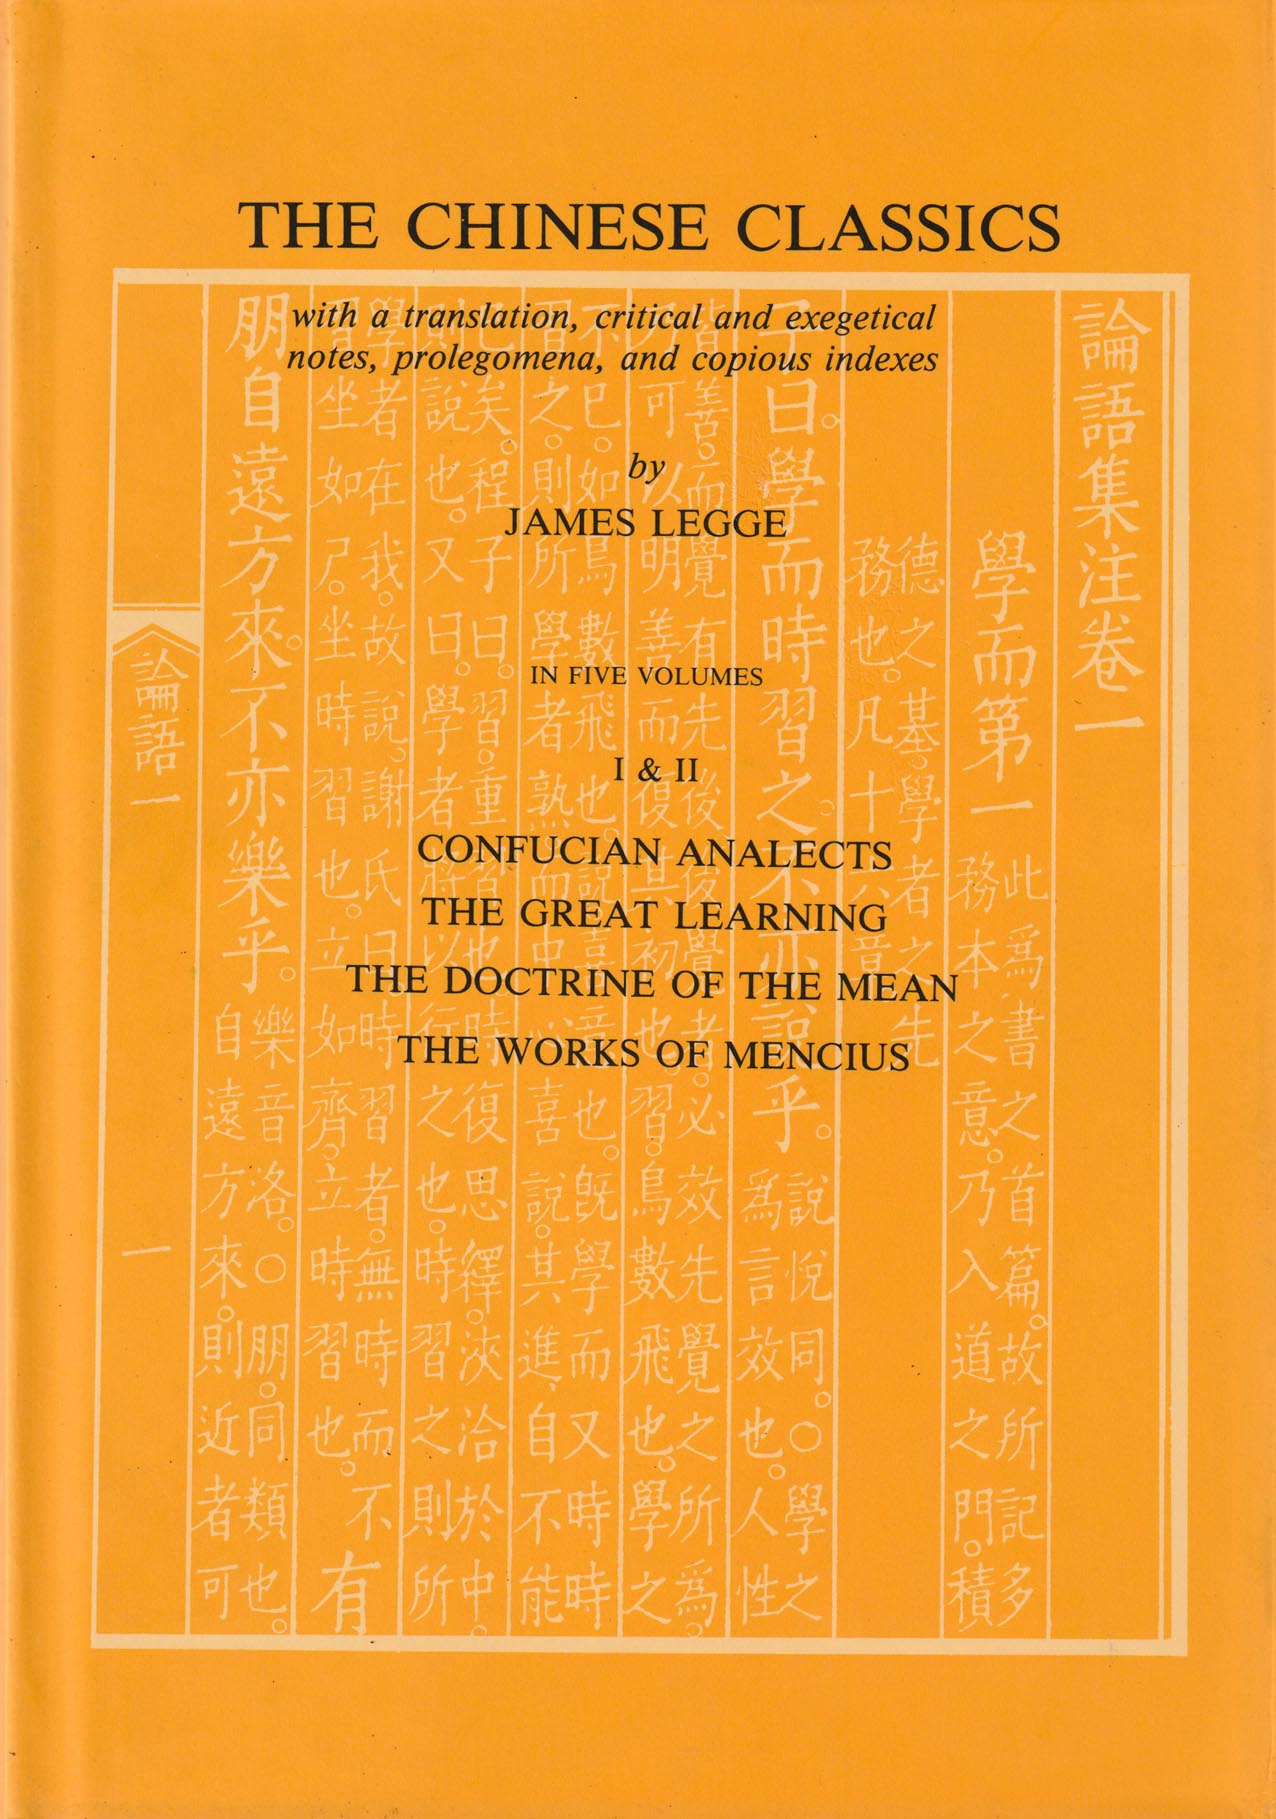 The Chinese Classics: With a Translation, Critical and Exegetical Notes, Prolegomena and Copious Indexes (5 vol.'s in 4) - Legge, James